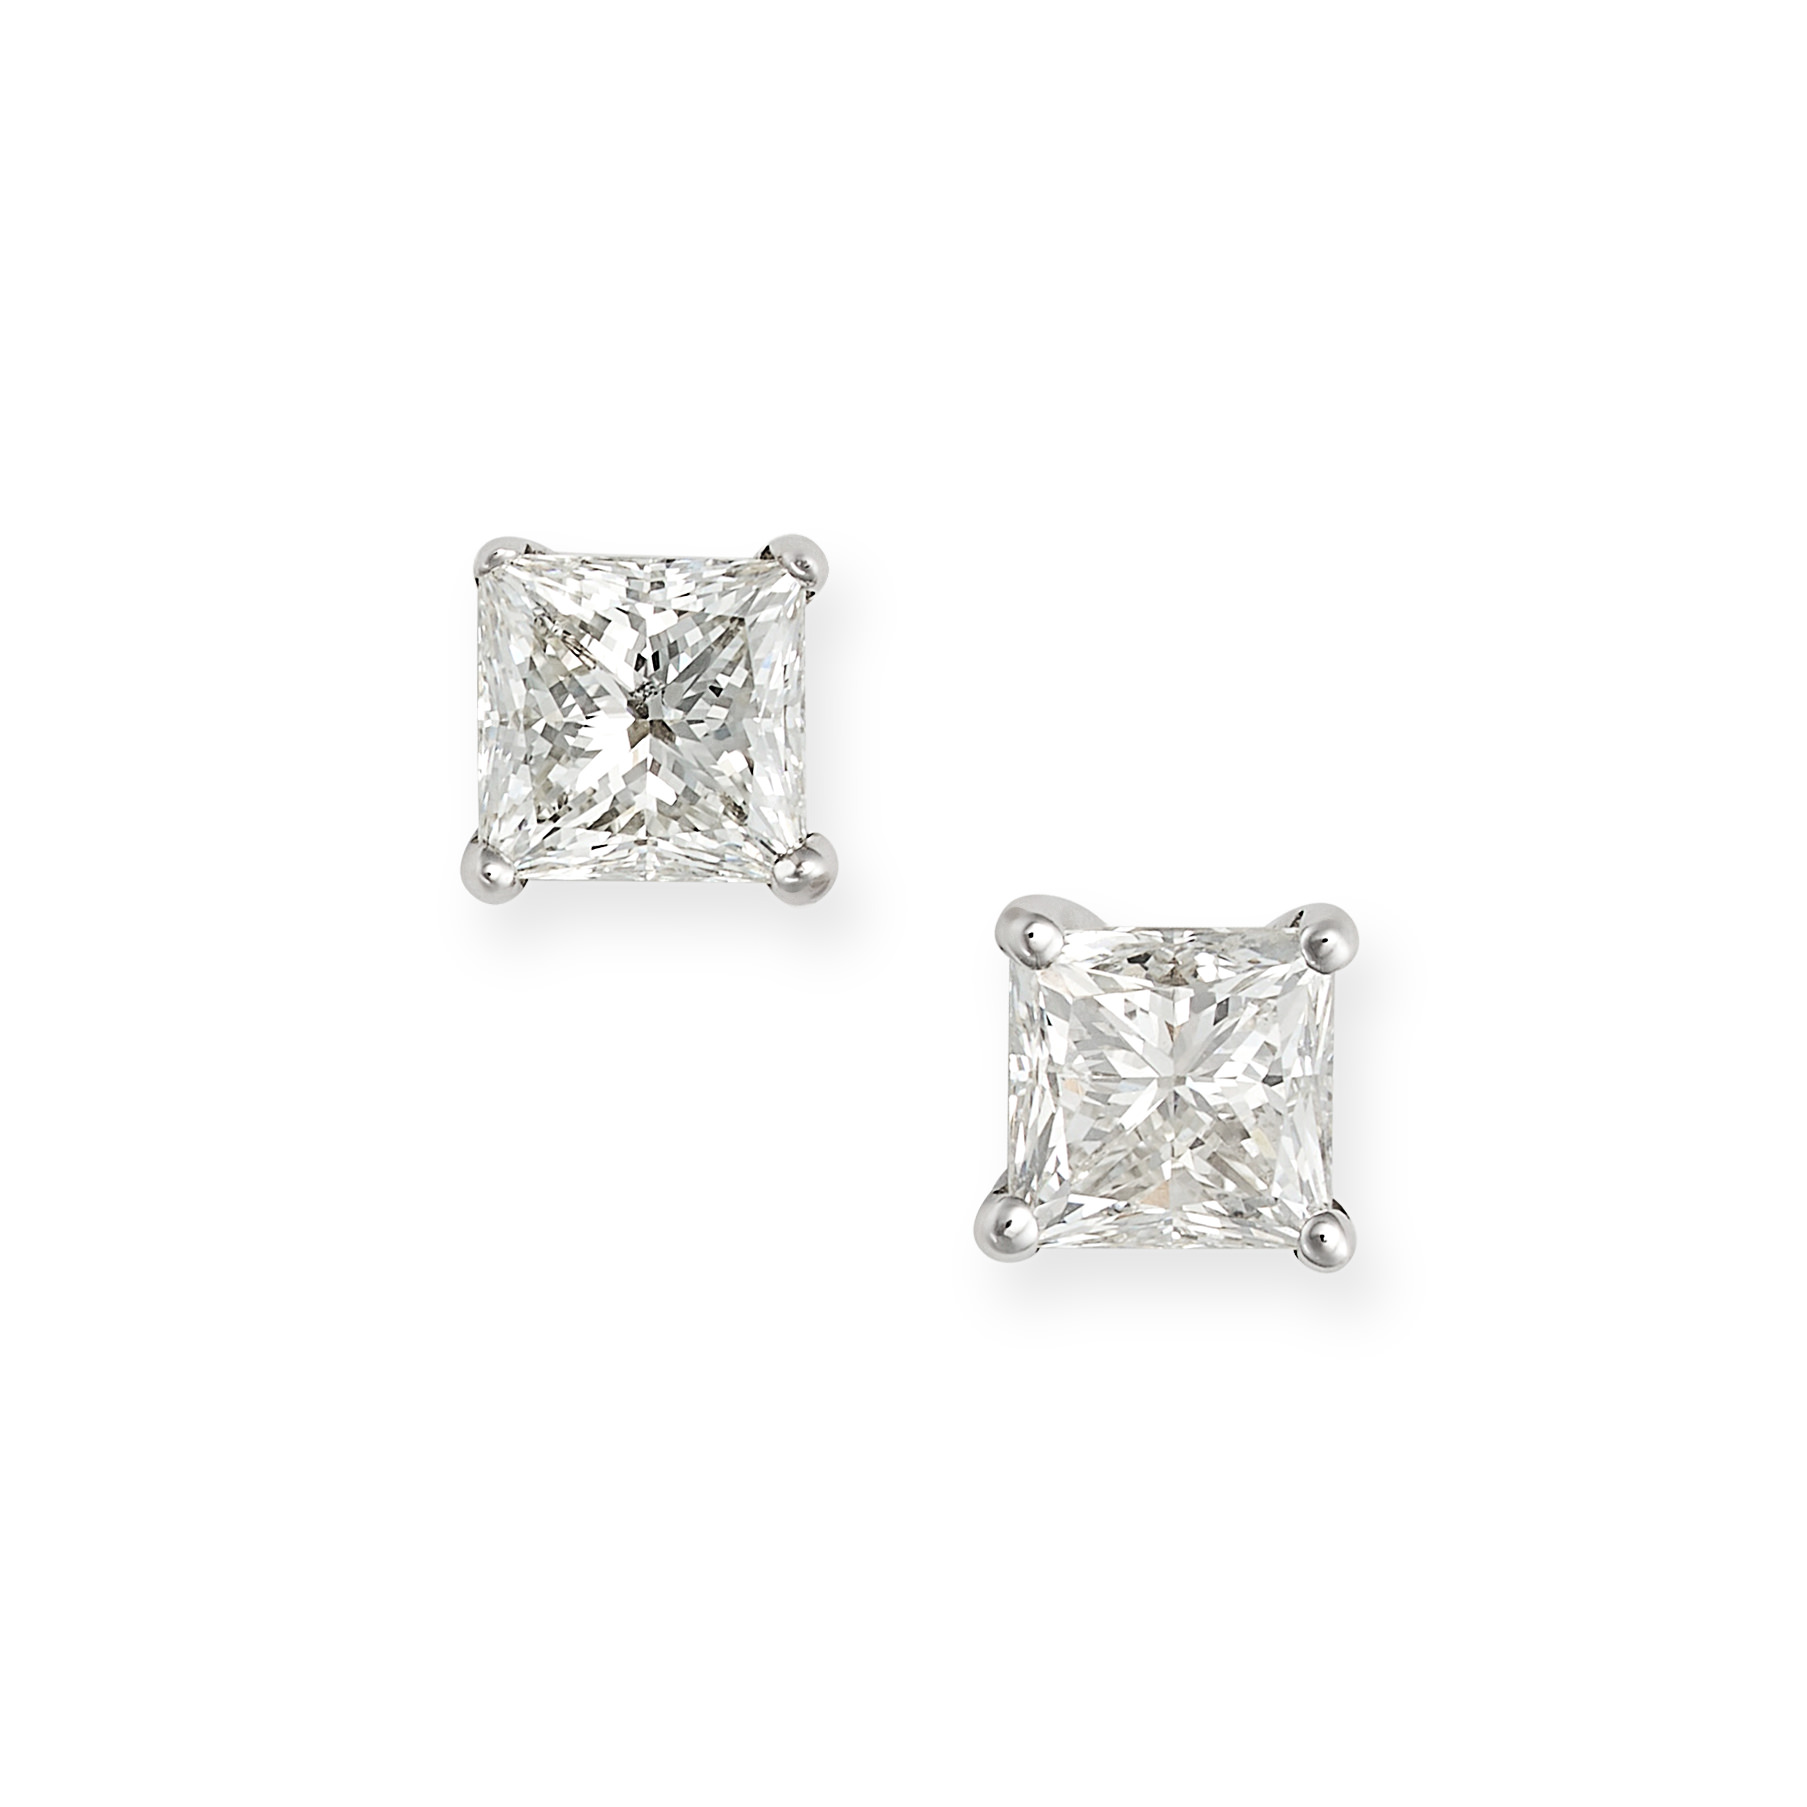 A PAIR OF DIAMOND STUD EARRINGS in 18ct yellow and white gold, each set with a princess cut diamo...